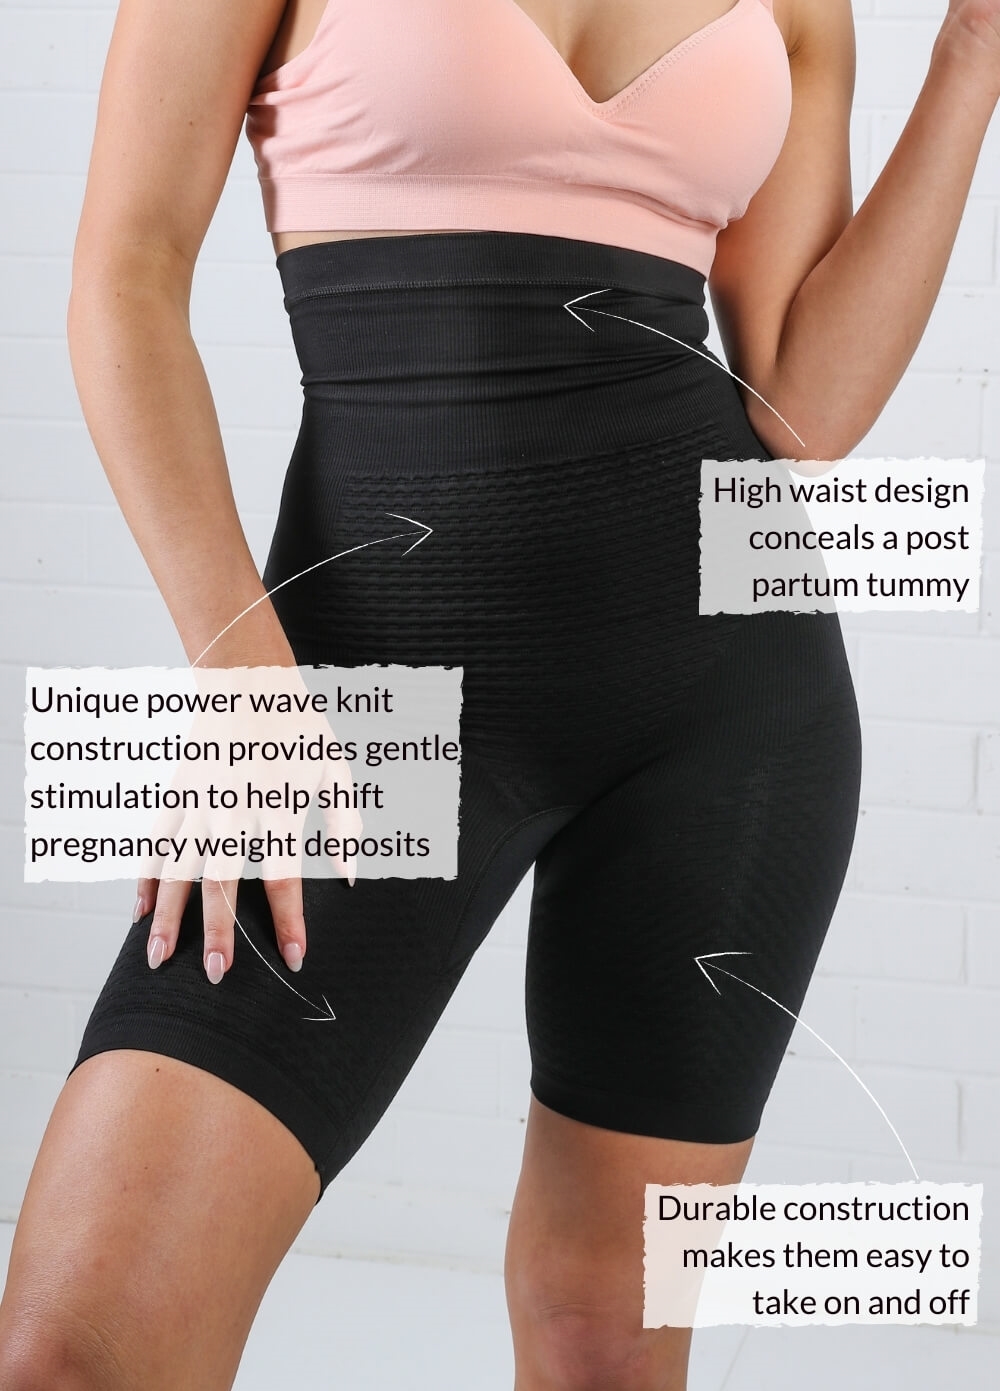 Postpartum recovery support wear shorts